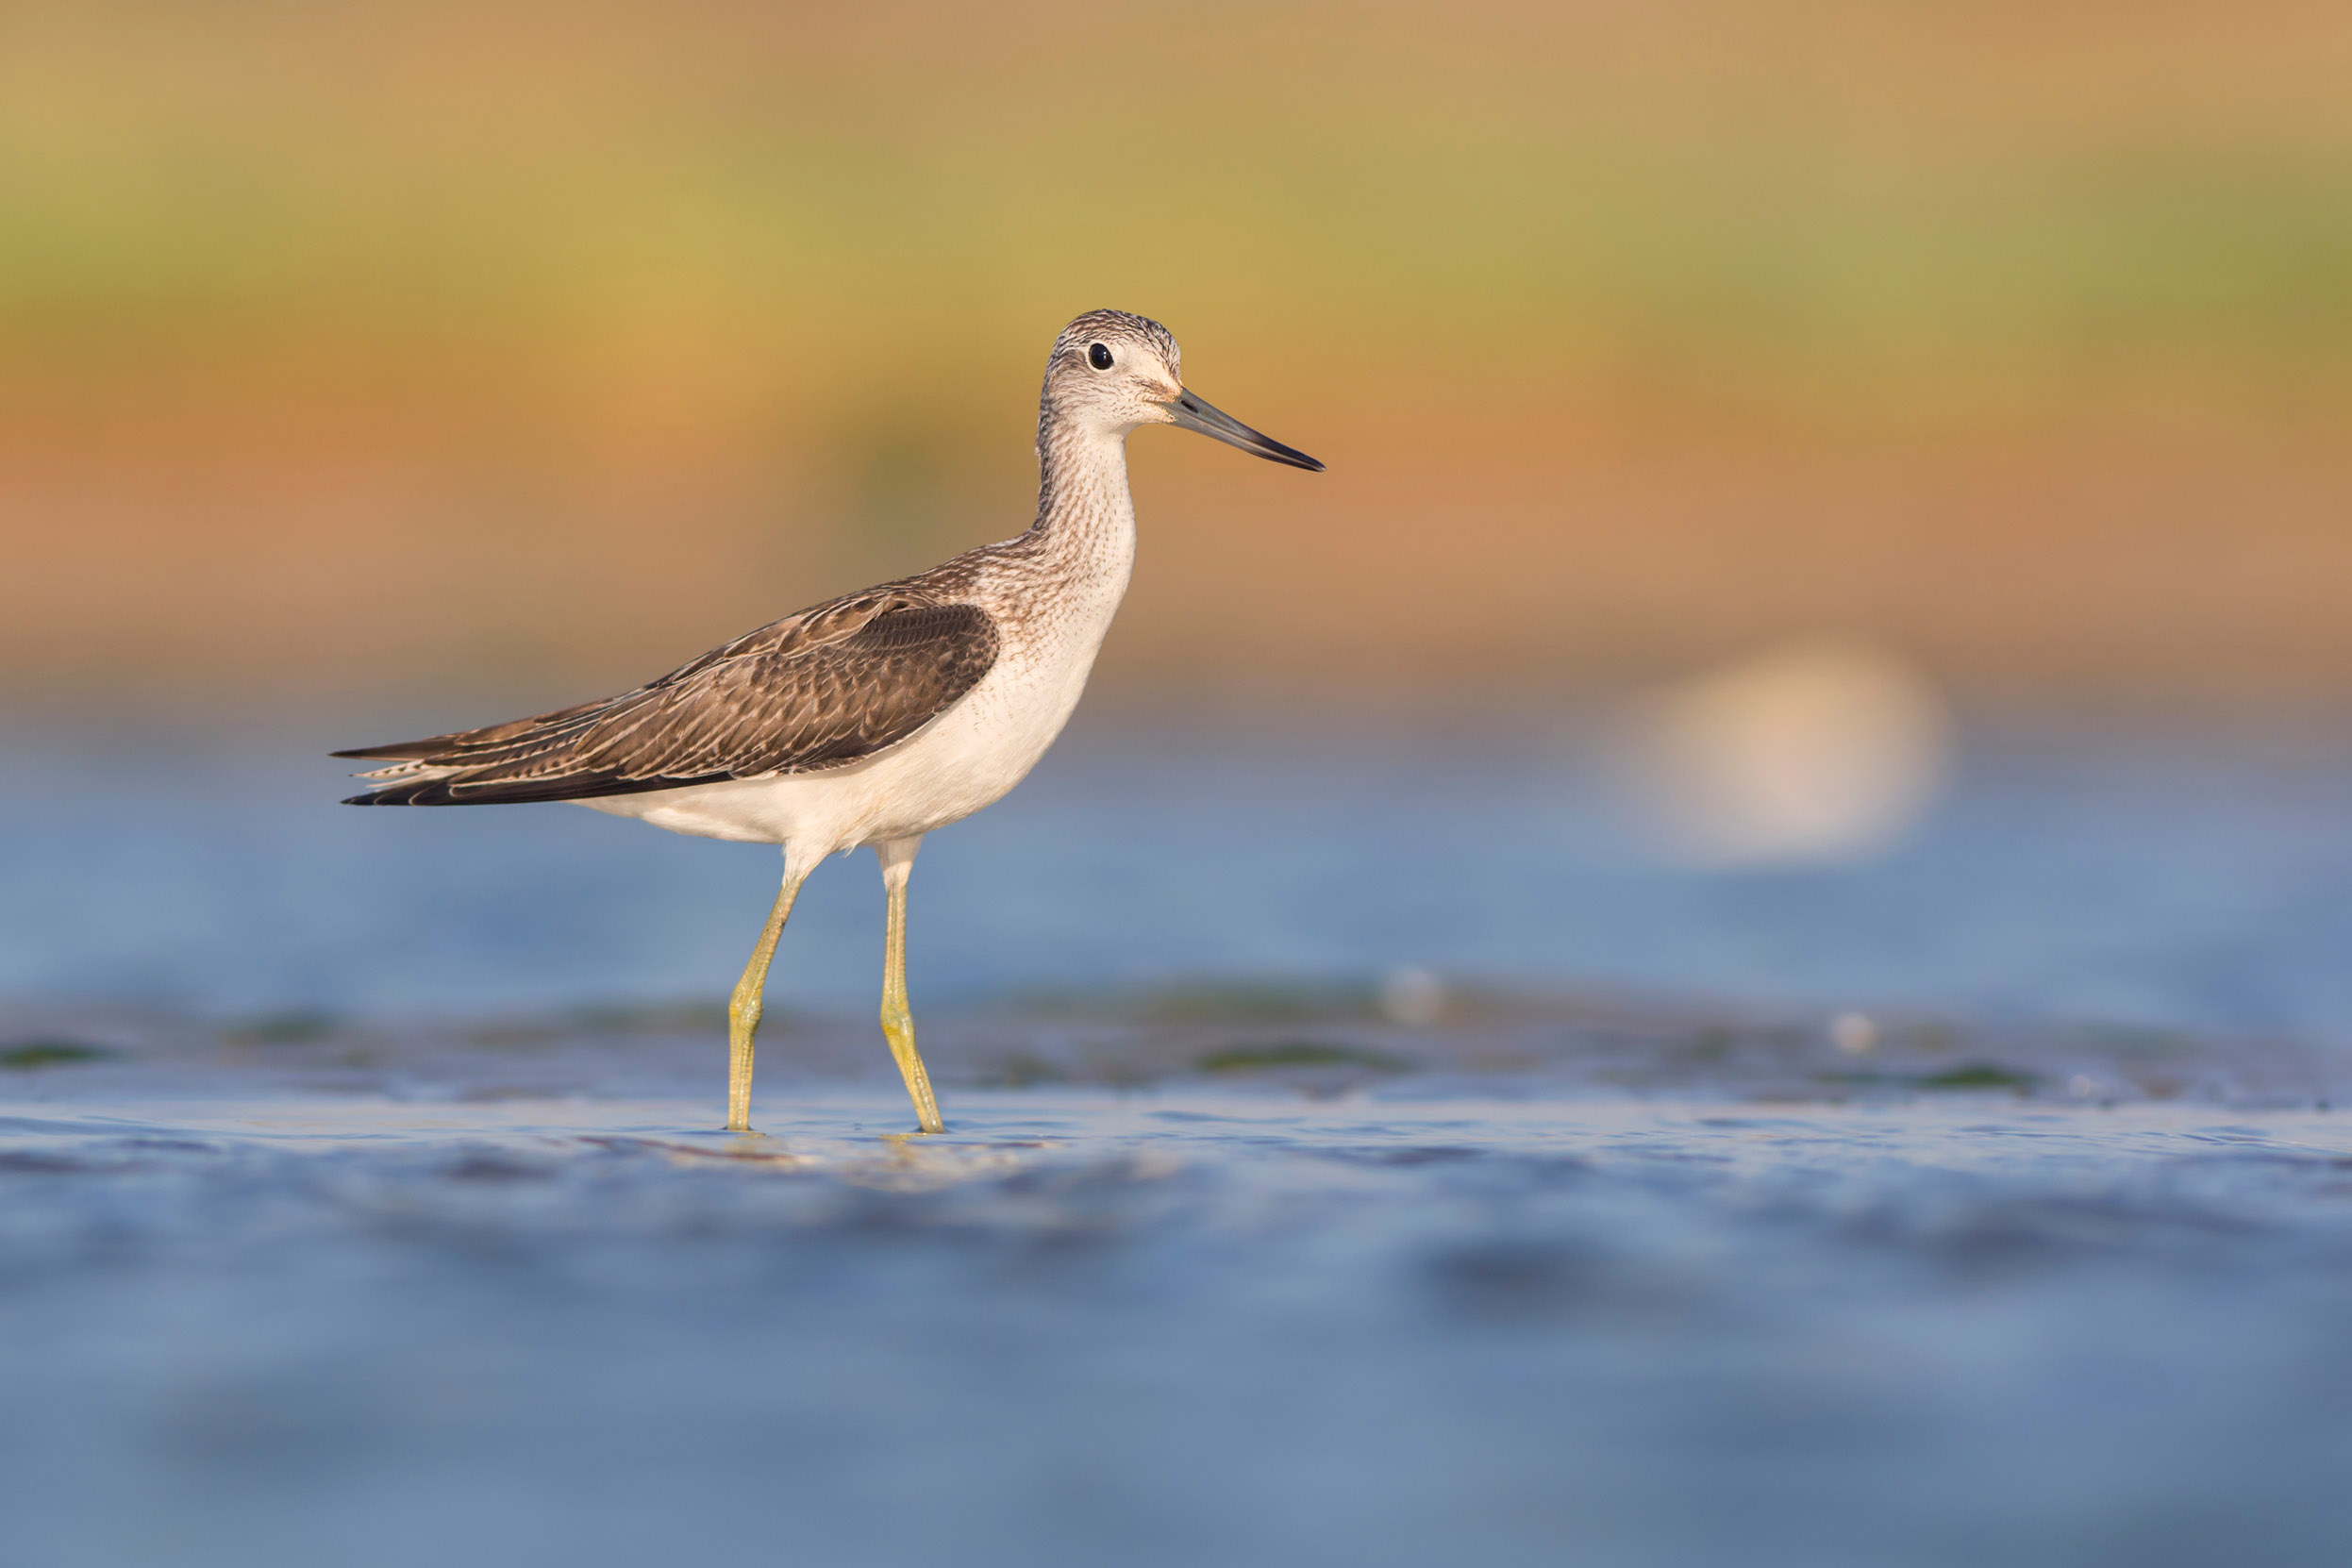 A lone Greenshank wading through shallow waters.